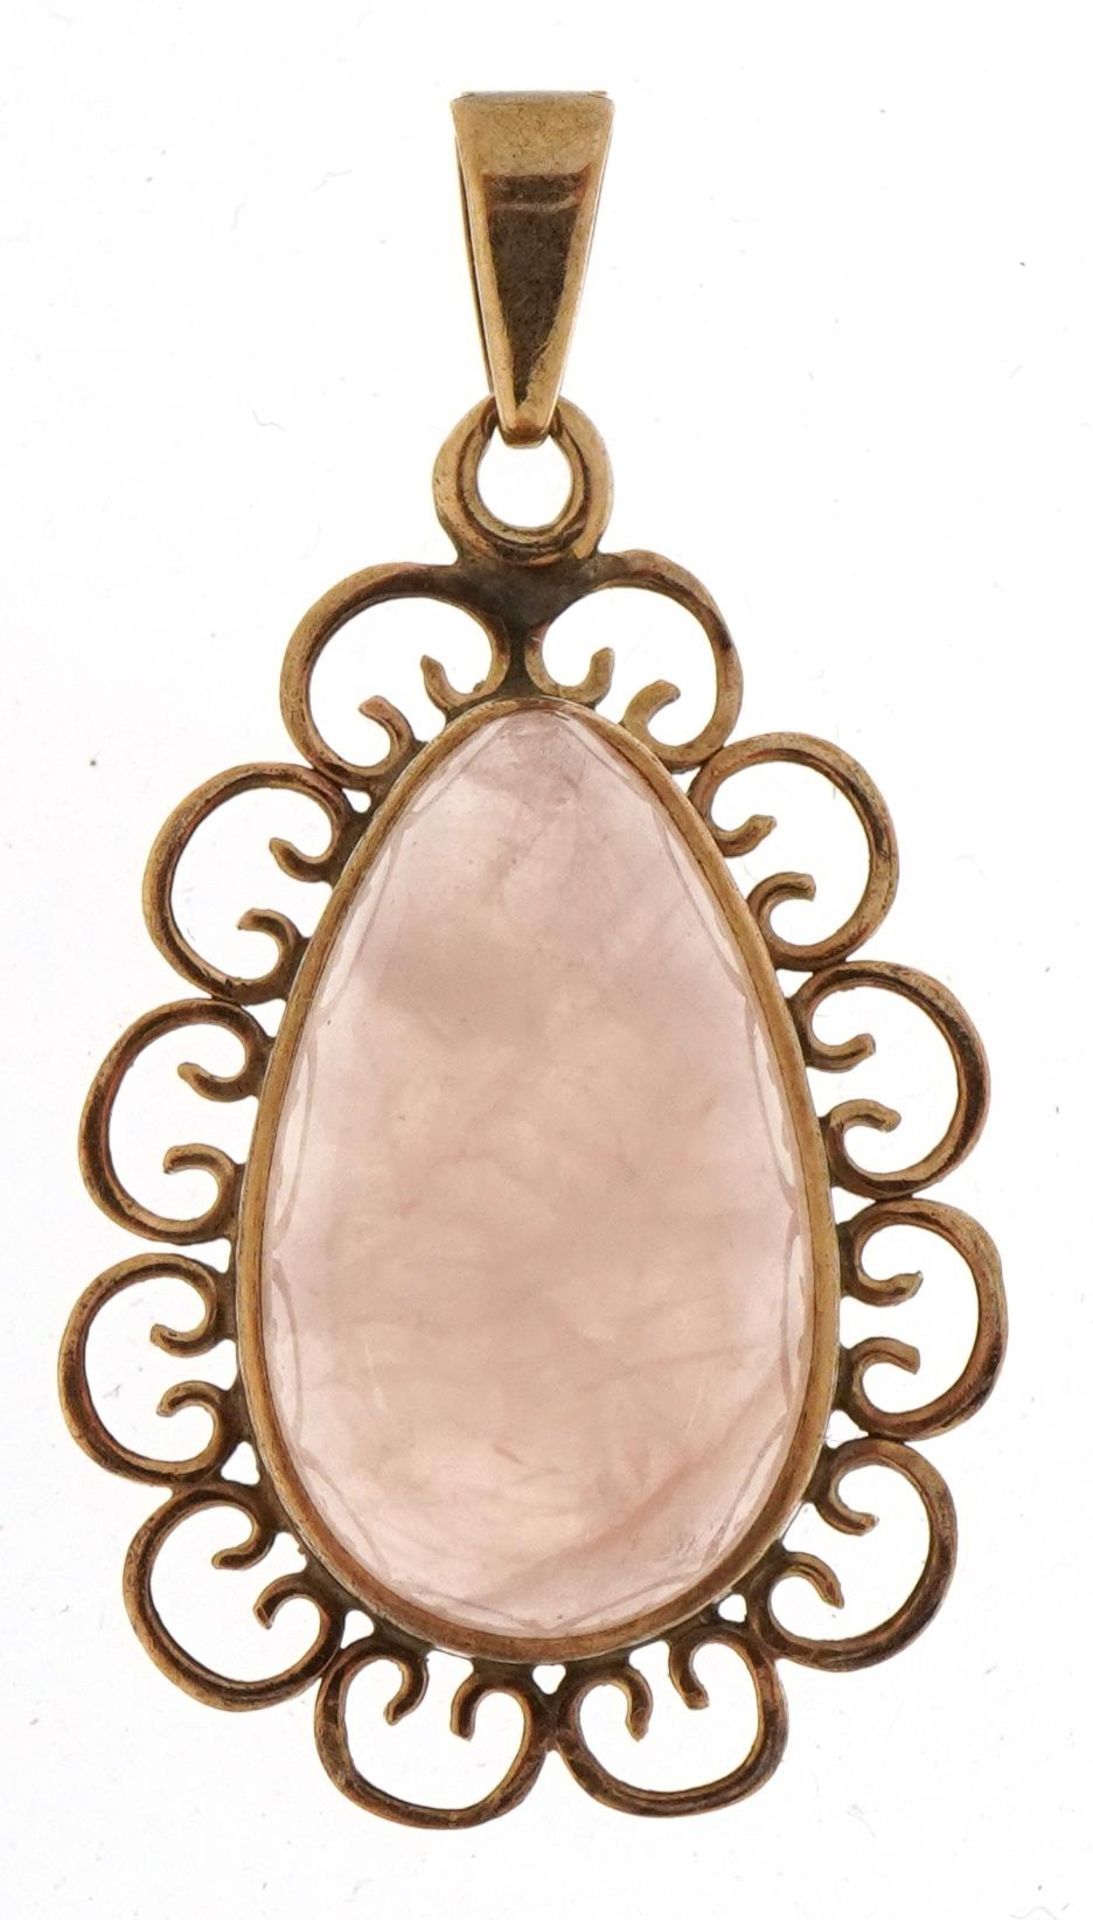 9ct gold cabochon rose quartz teardrop pendant, 3.1cm high, 2.7g : For further information on this